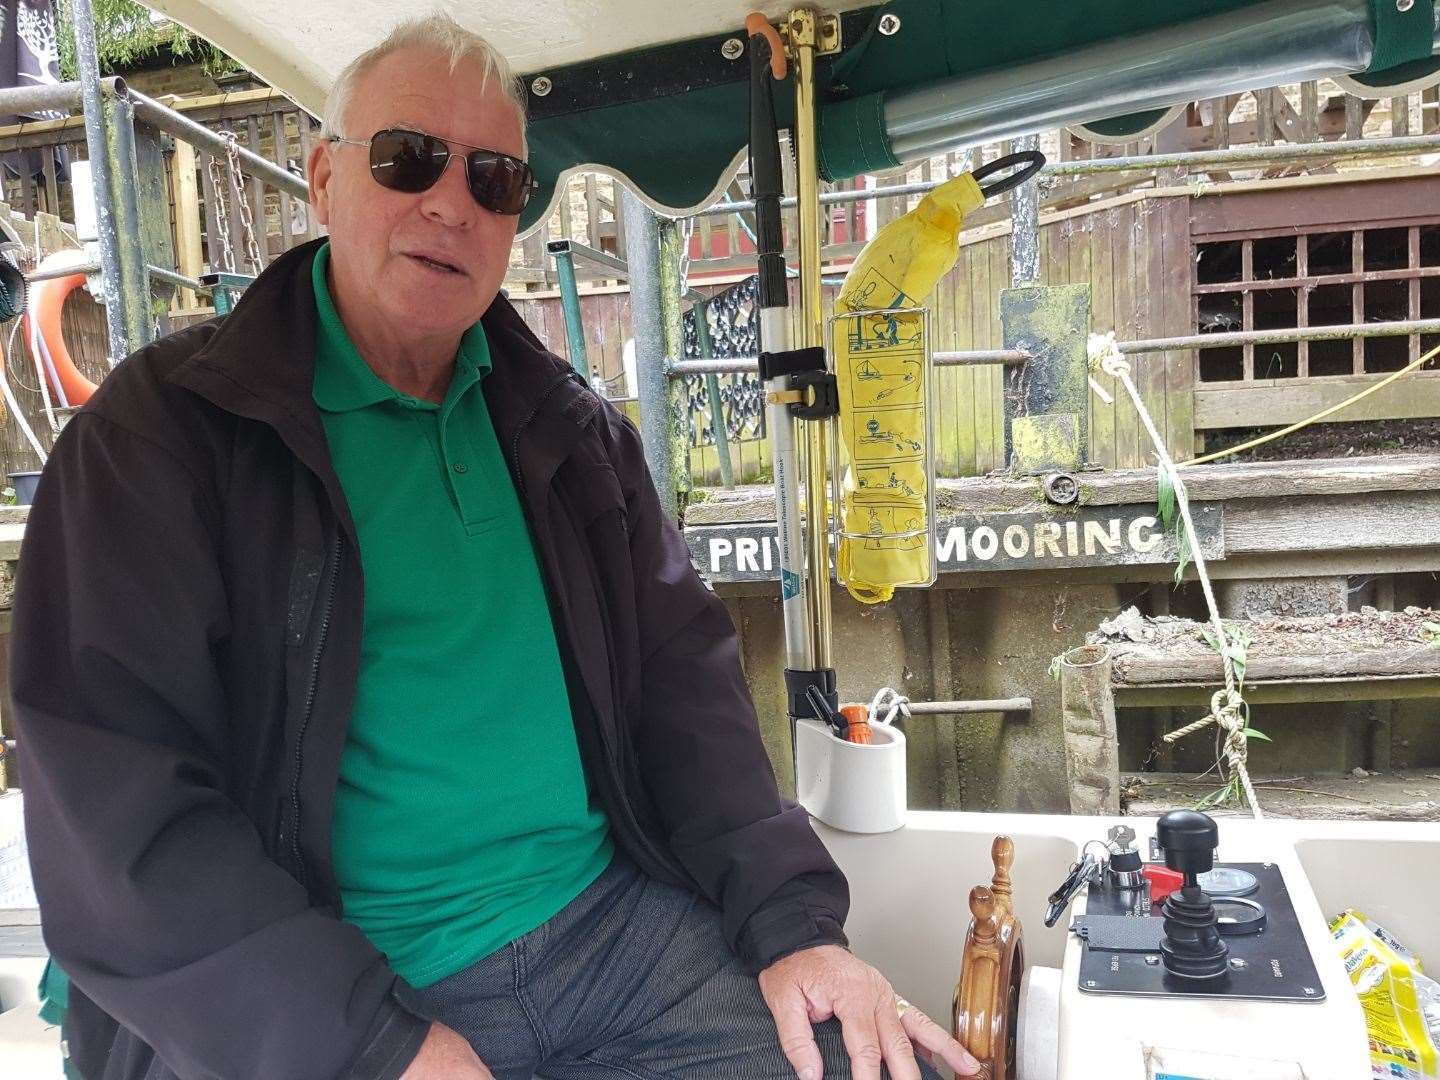 Peter Dale, who runs Grove Ferry River Tours